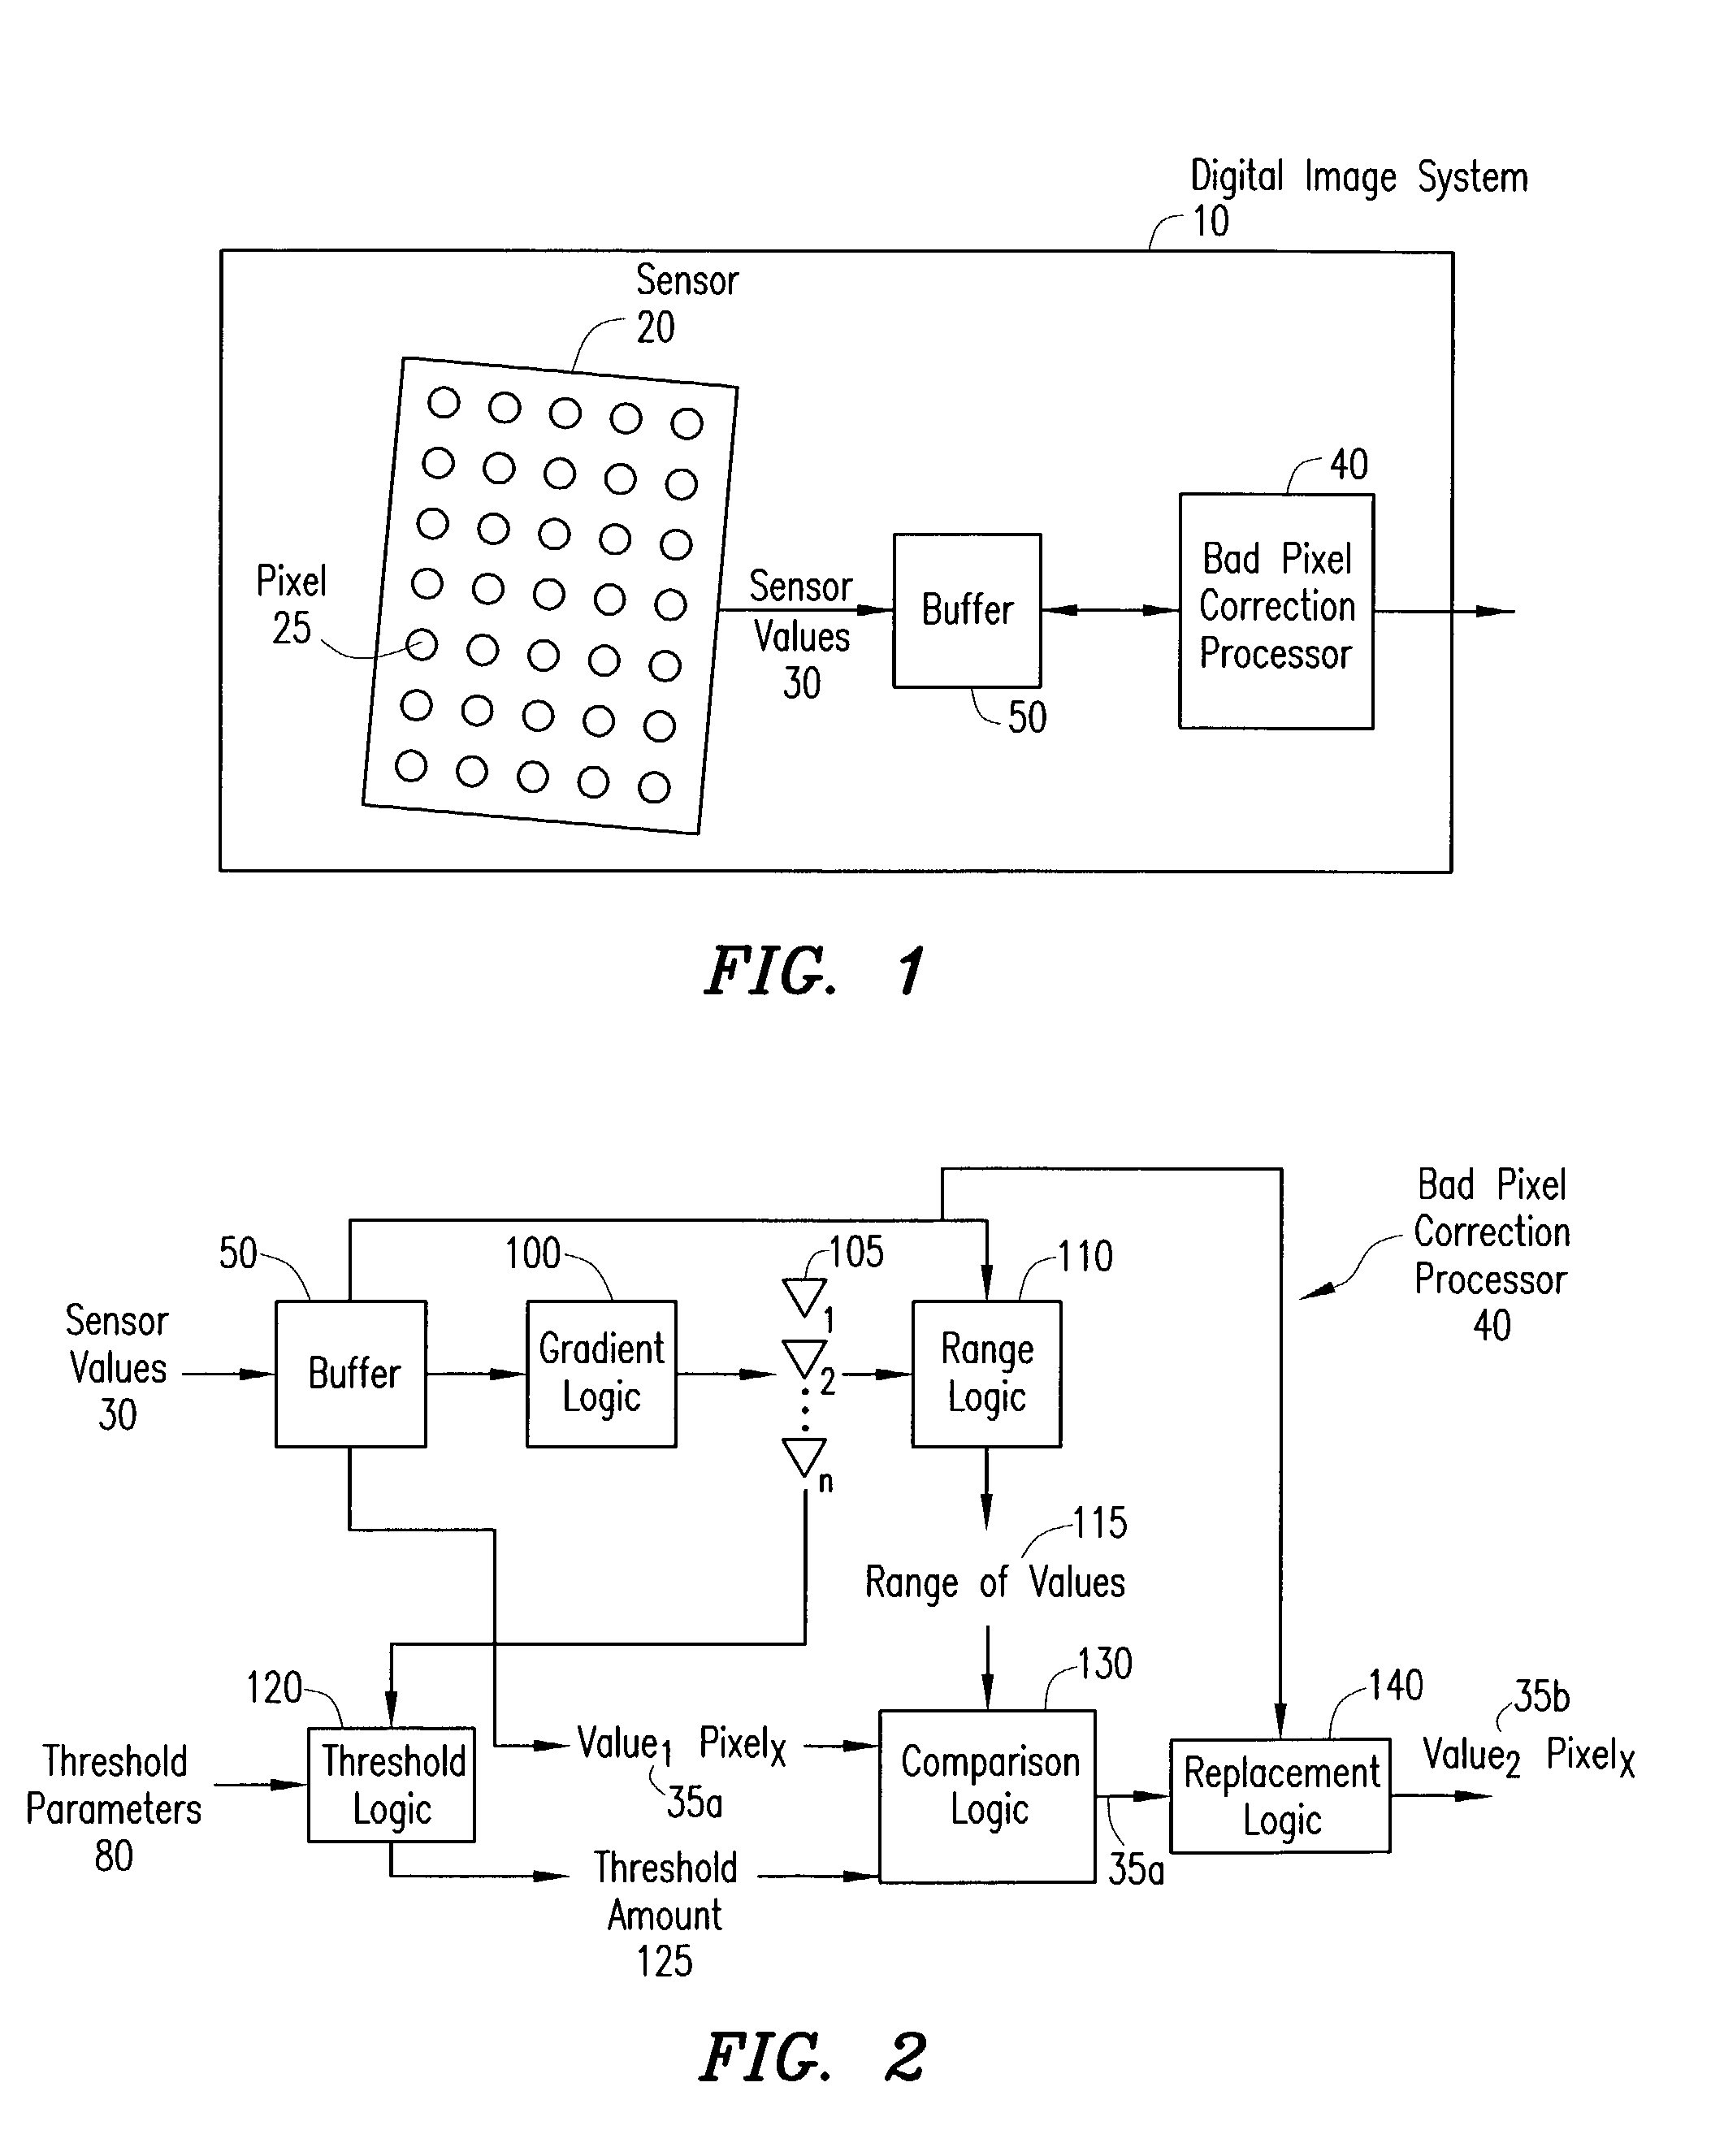 Method for detecting and correcting defective pixels in a digital image sensor